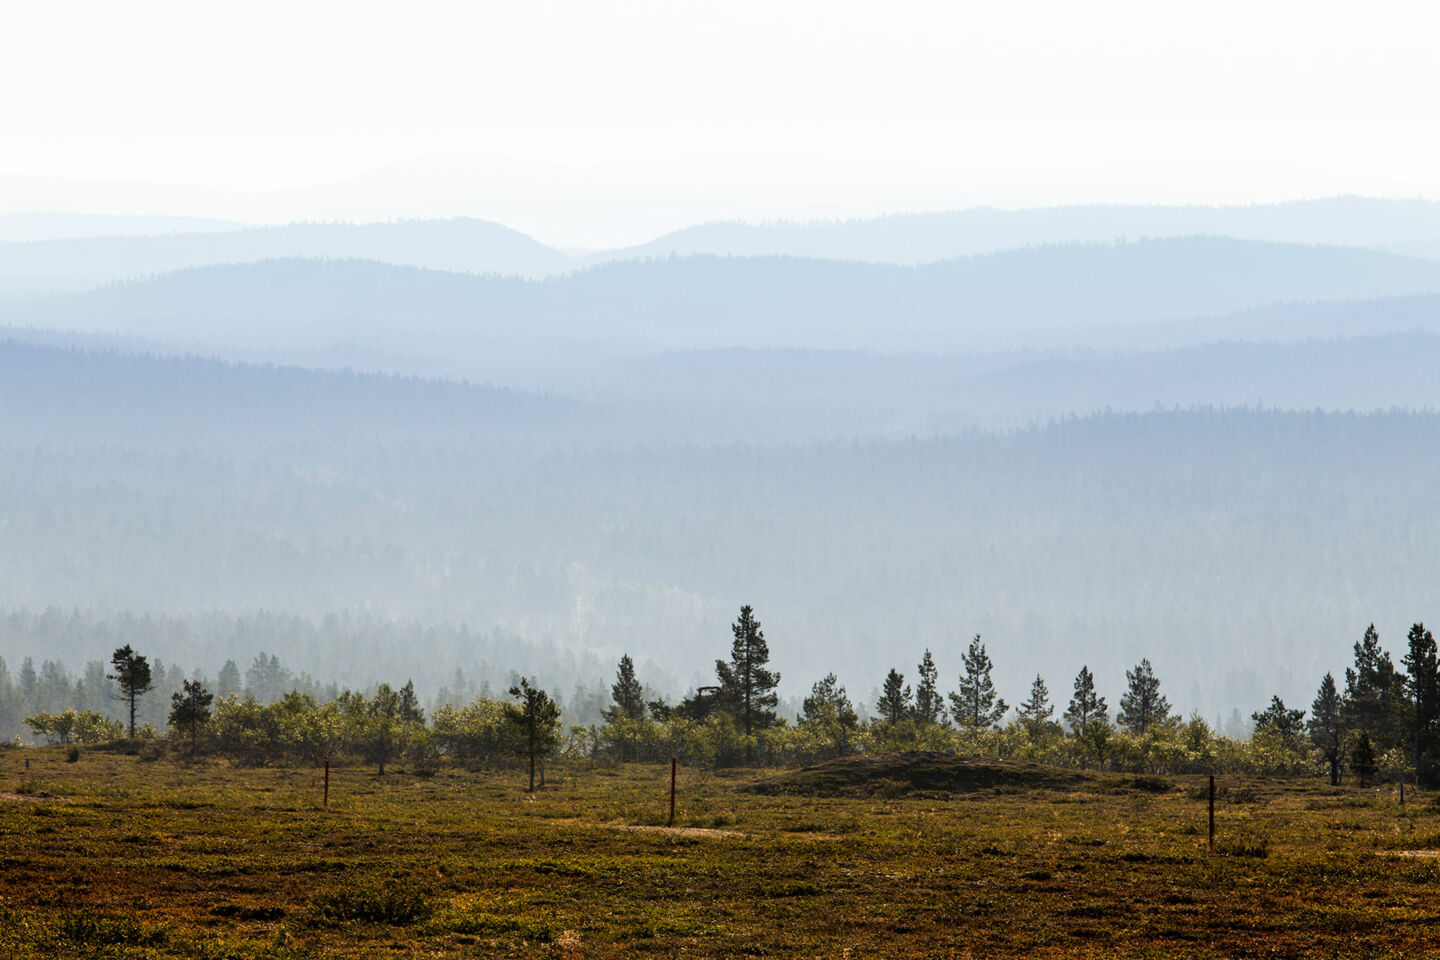 A misty autumn day in the wilderness in Inari, a Finnish Lapland filming location